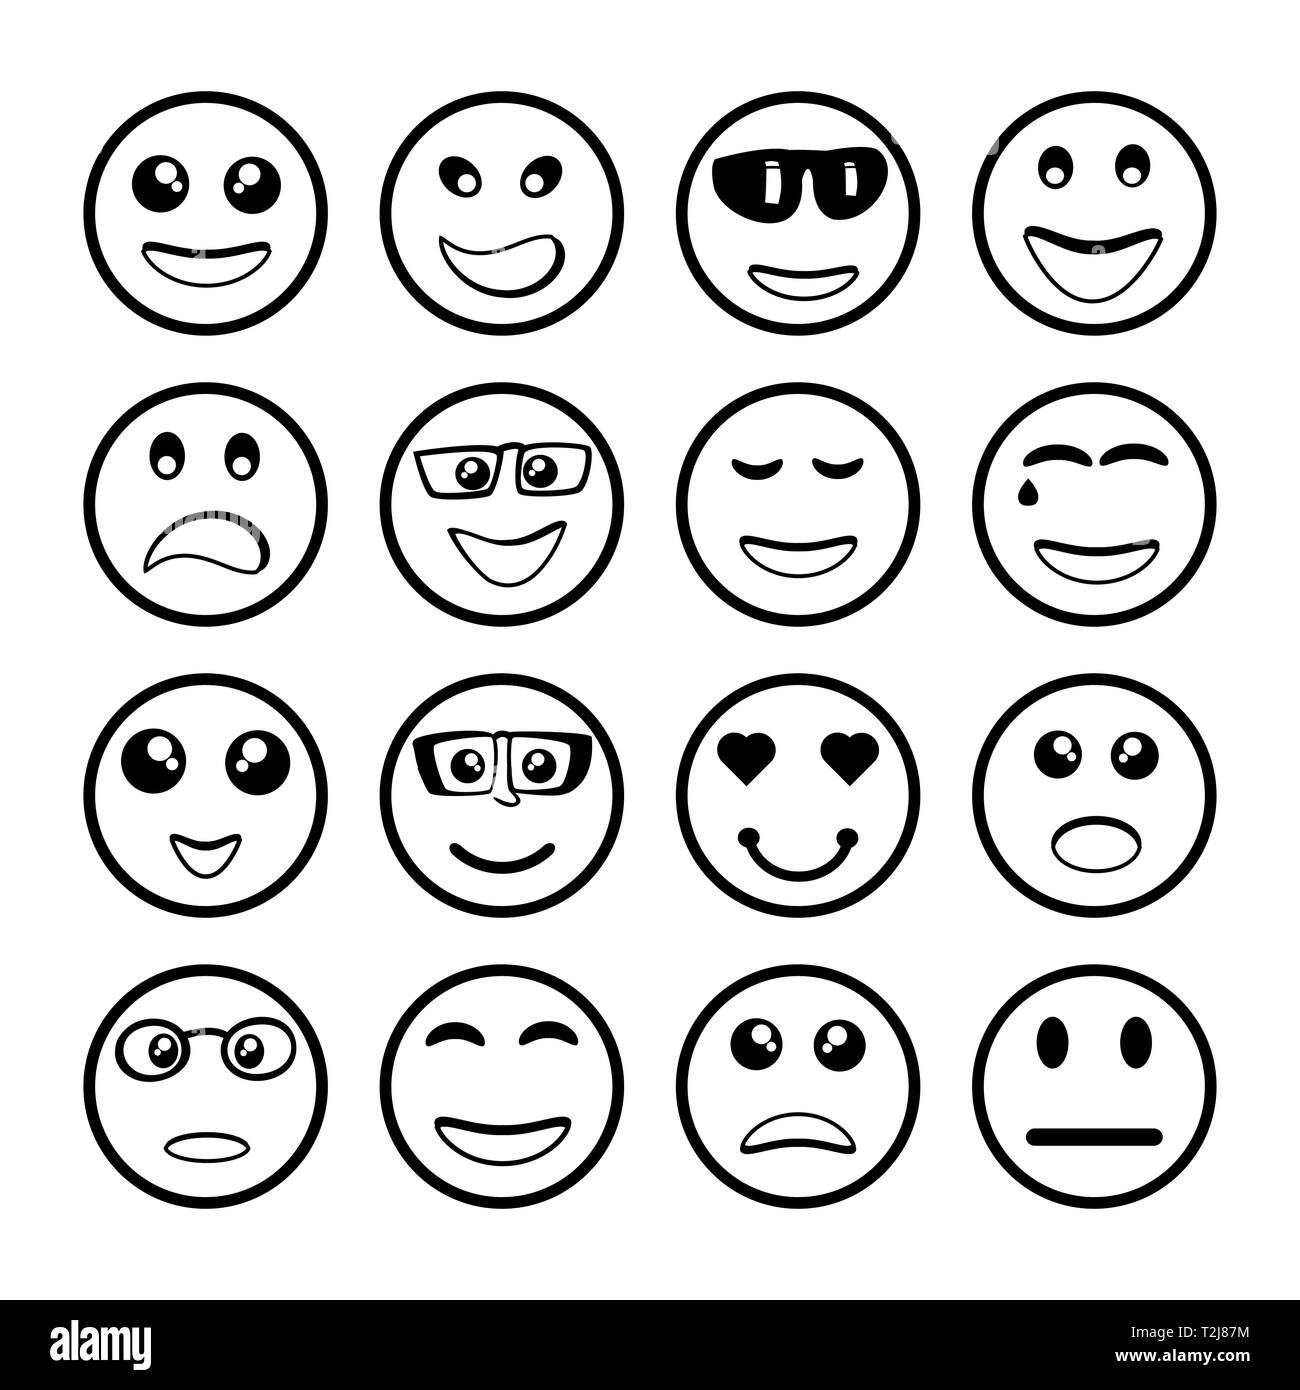 Smiley Face Emoji Black and White Stock Photos & Images - Page 2 - Alamy